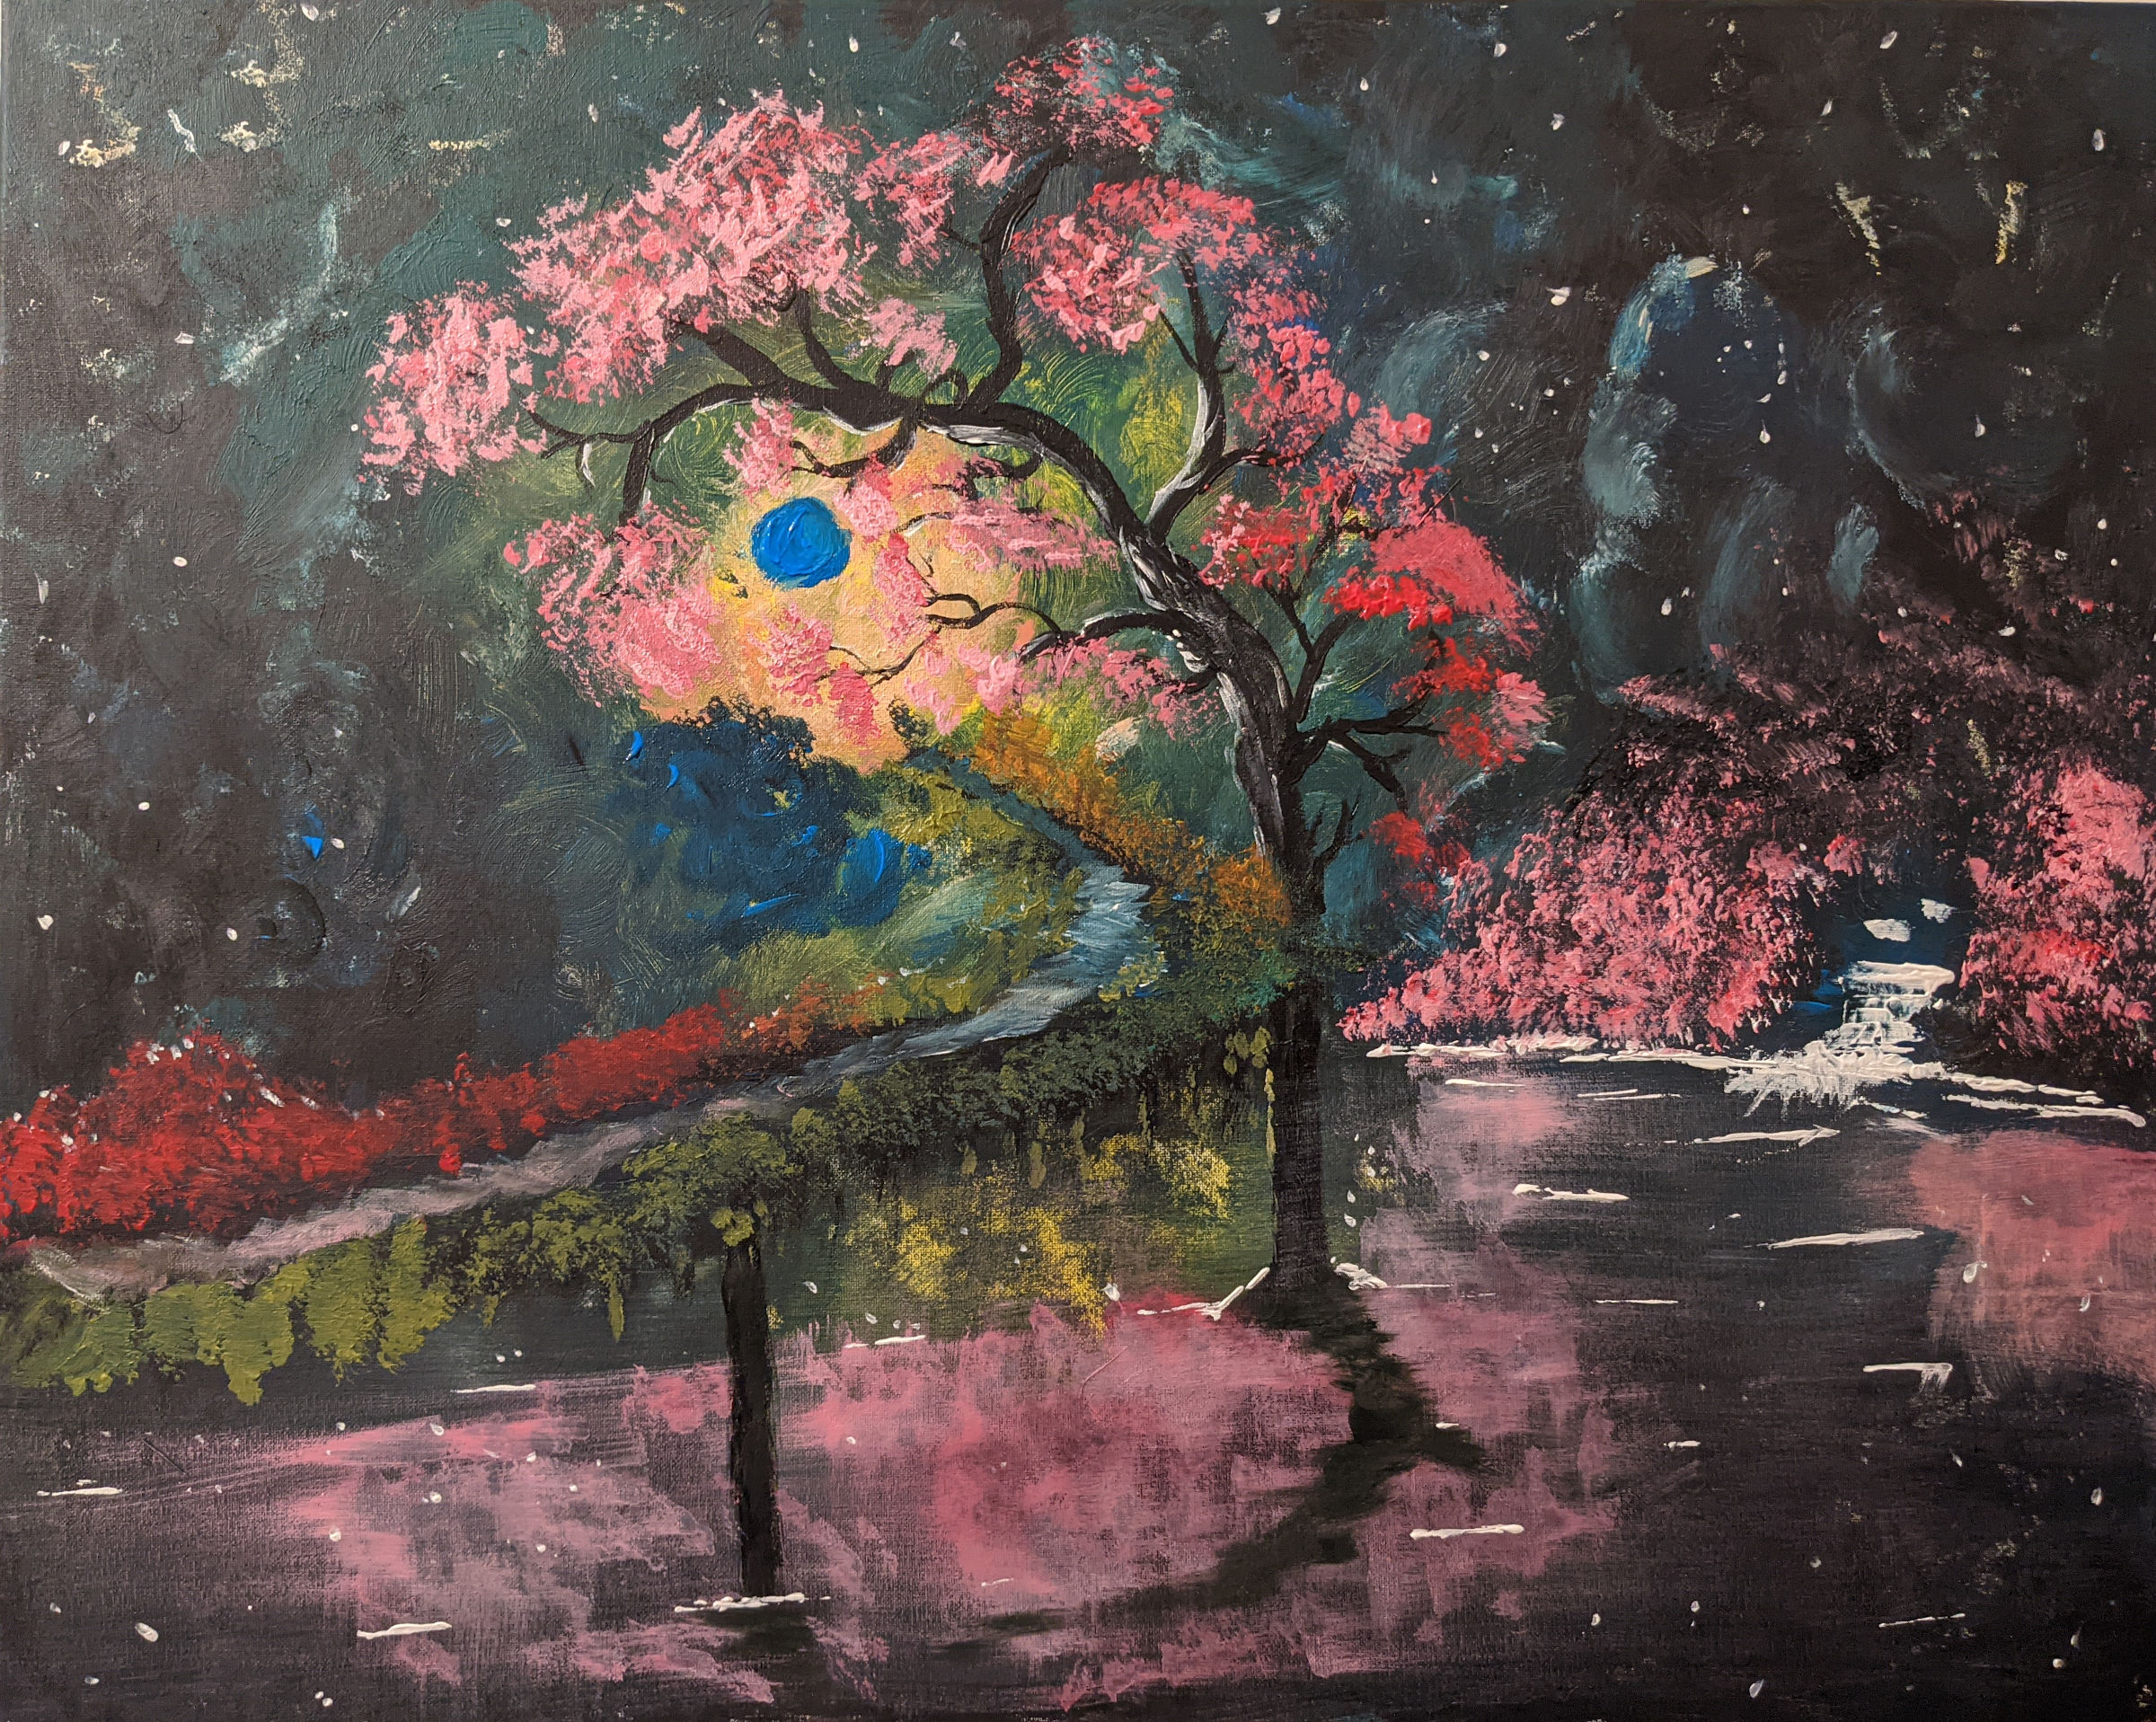 Dark abstract night painting. It features a bridge curving over the water headed toward the moon/light in the distance.  A tree hangs over the bridge. There is a small waterfall on the right.